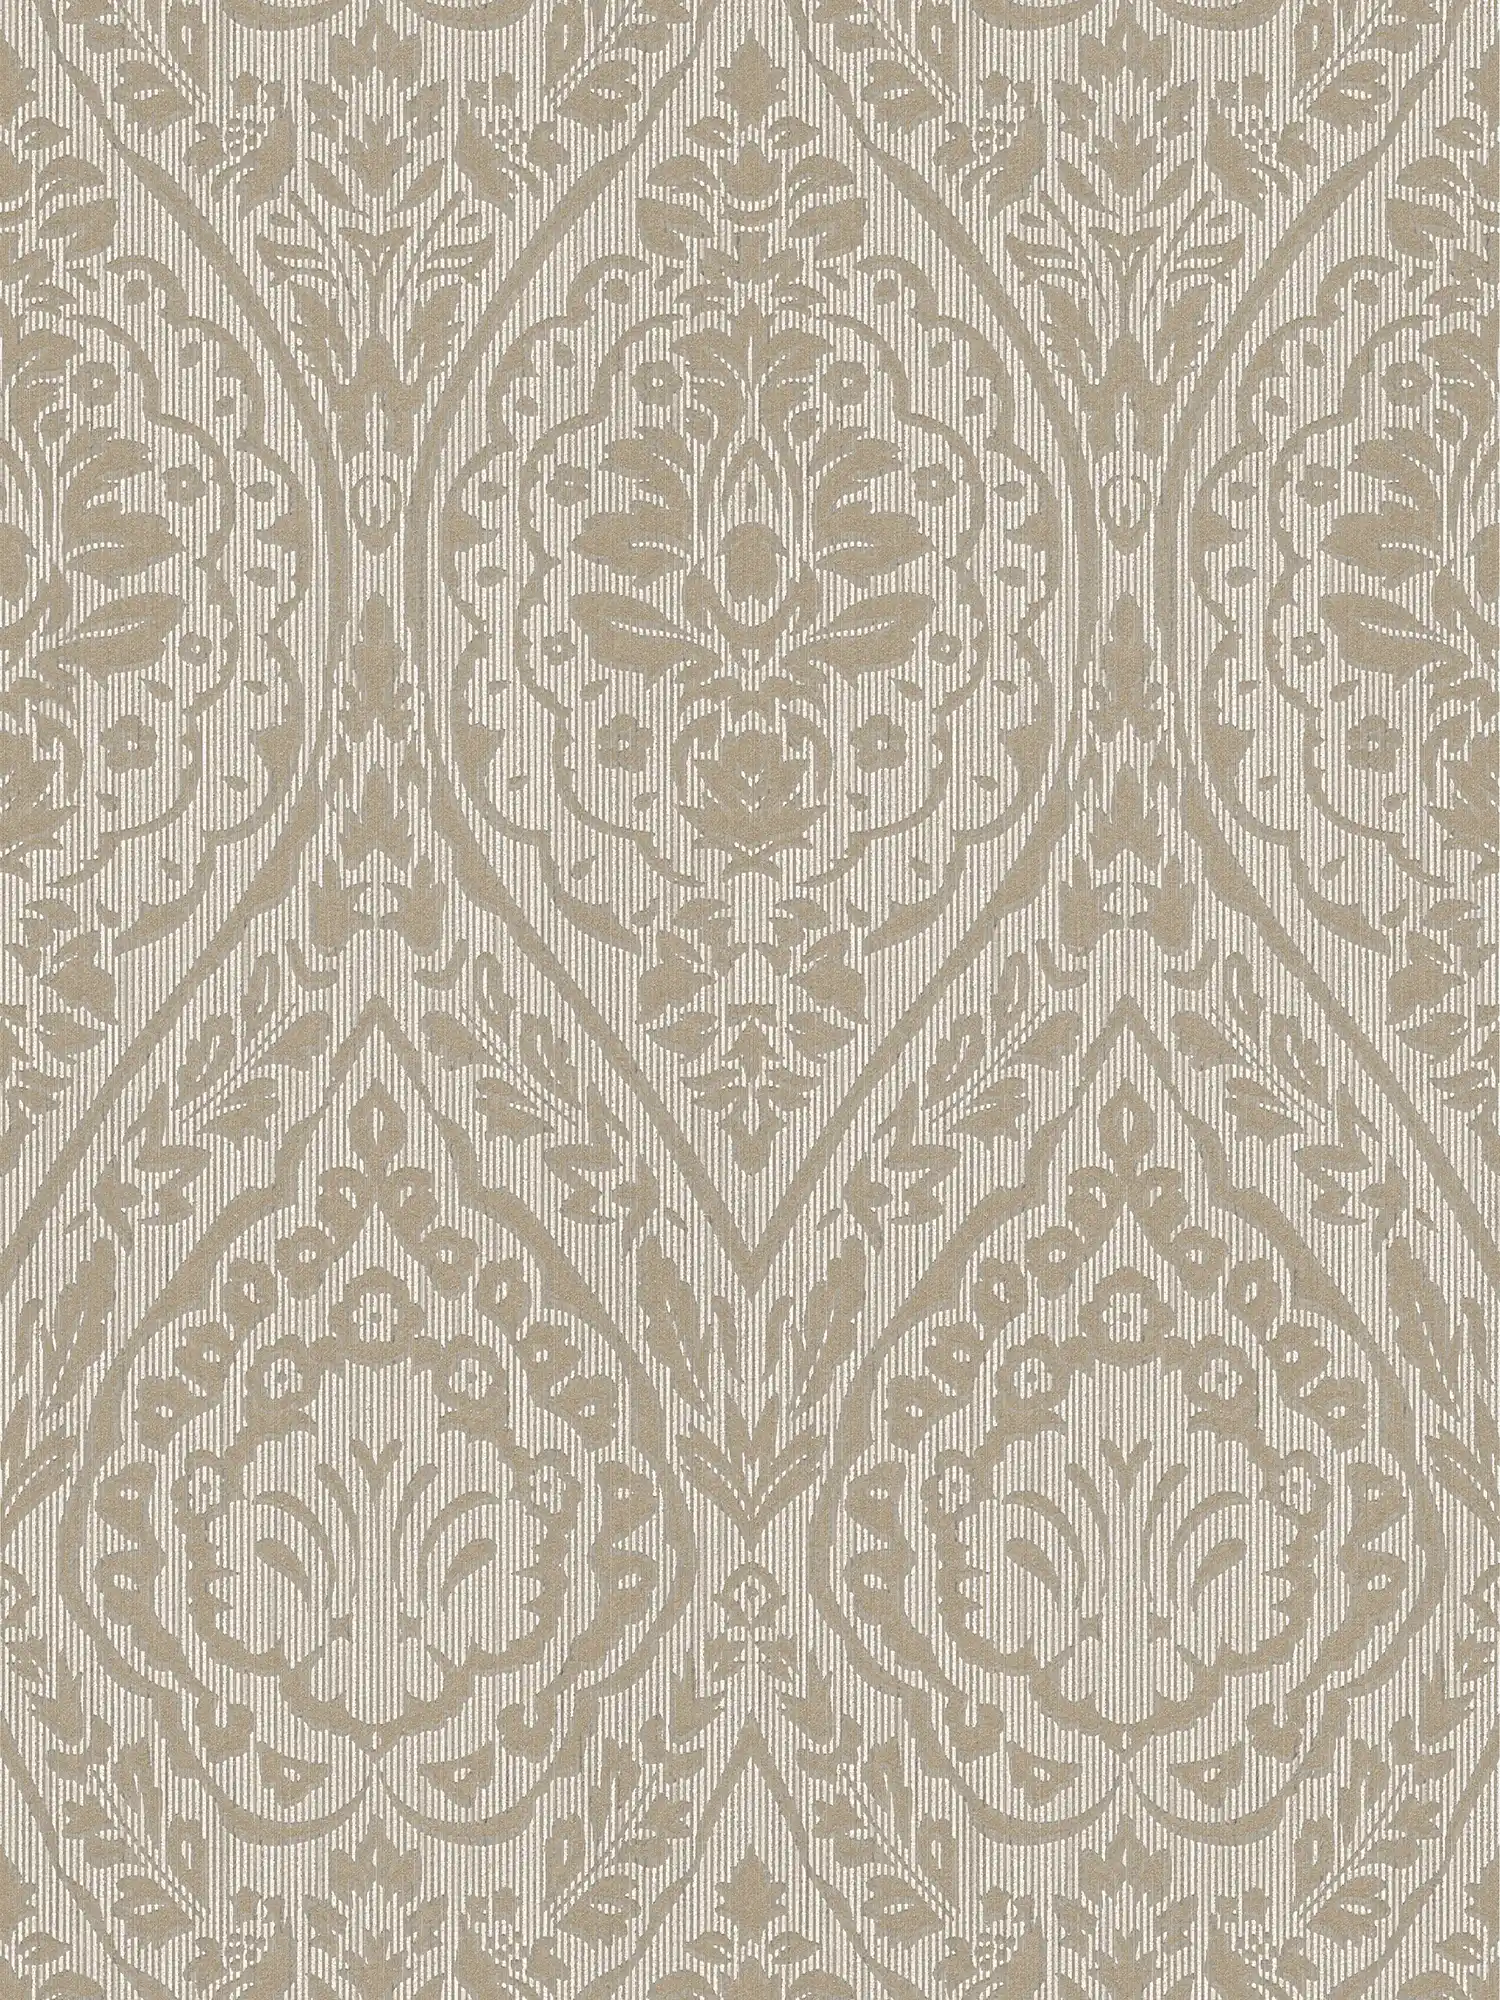 Wallpaper floral pattern with colonial style ornaments - beige, brown
